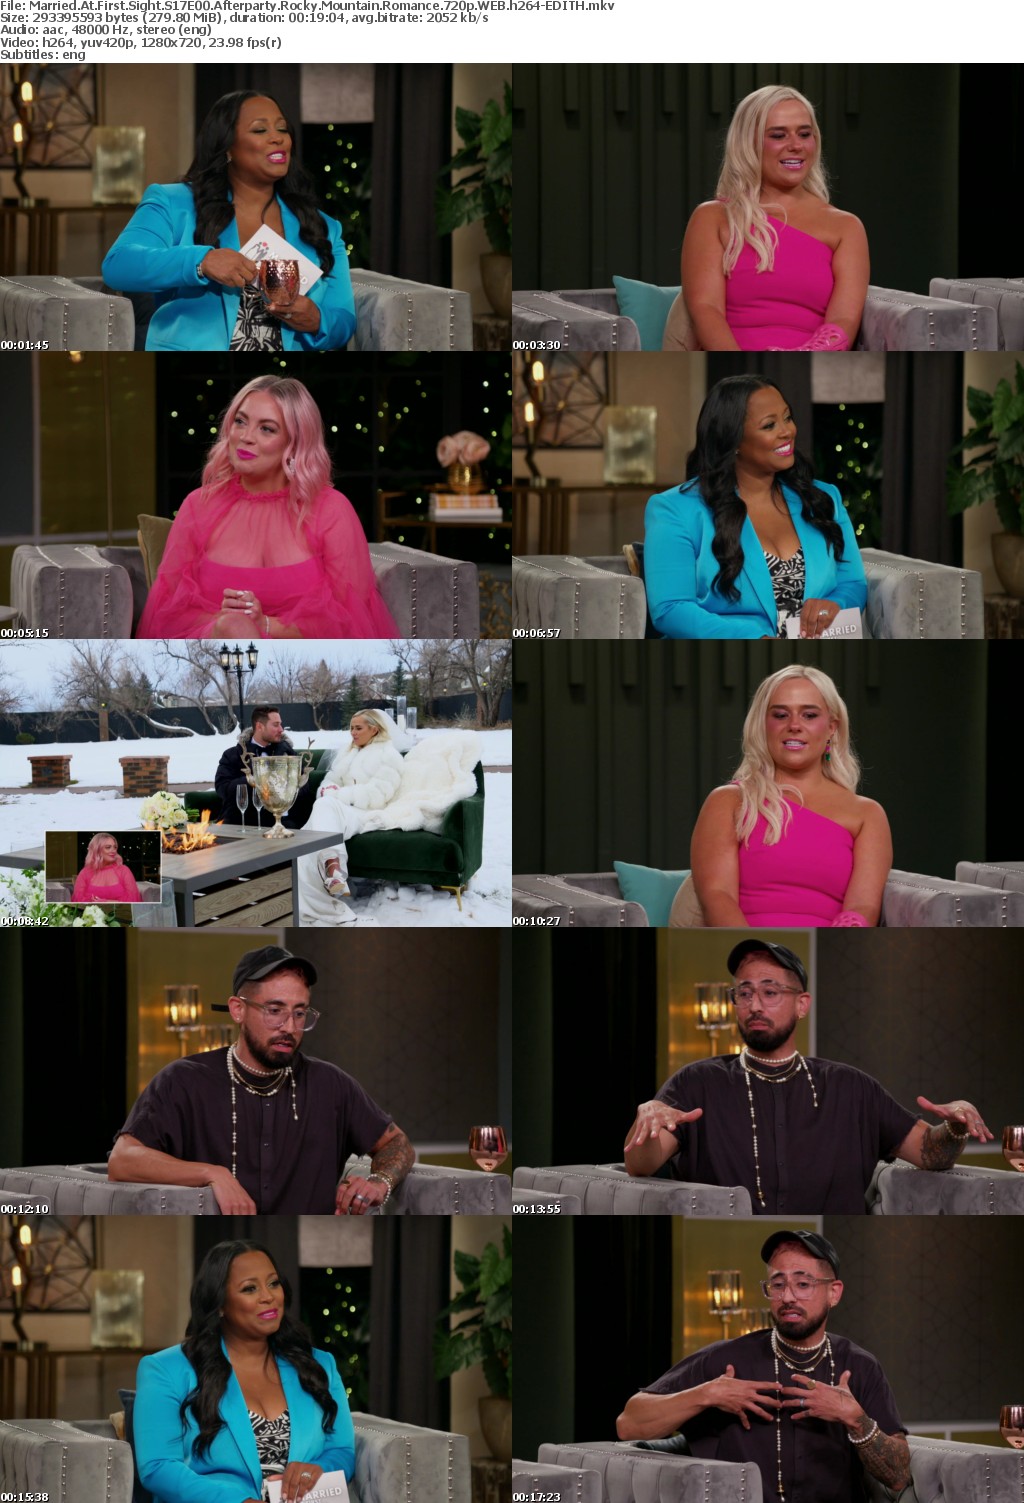 Married At First Sight S17E00 Afterparty Rocky Mountain Romance 720p WEB h264-EDITH